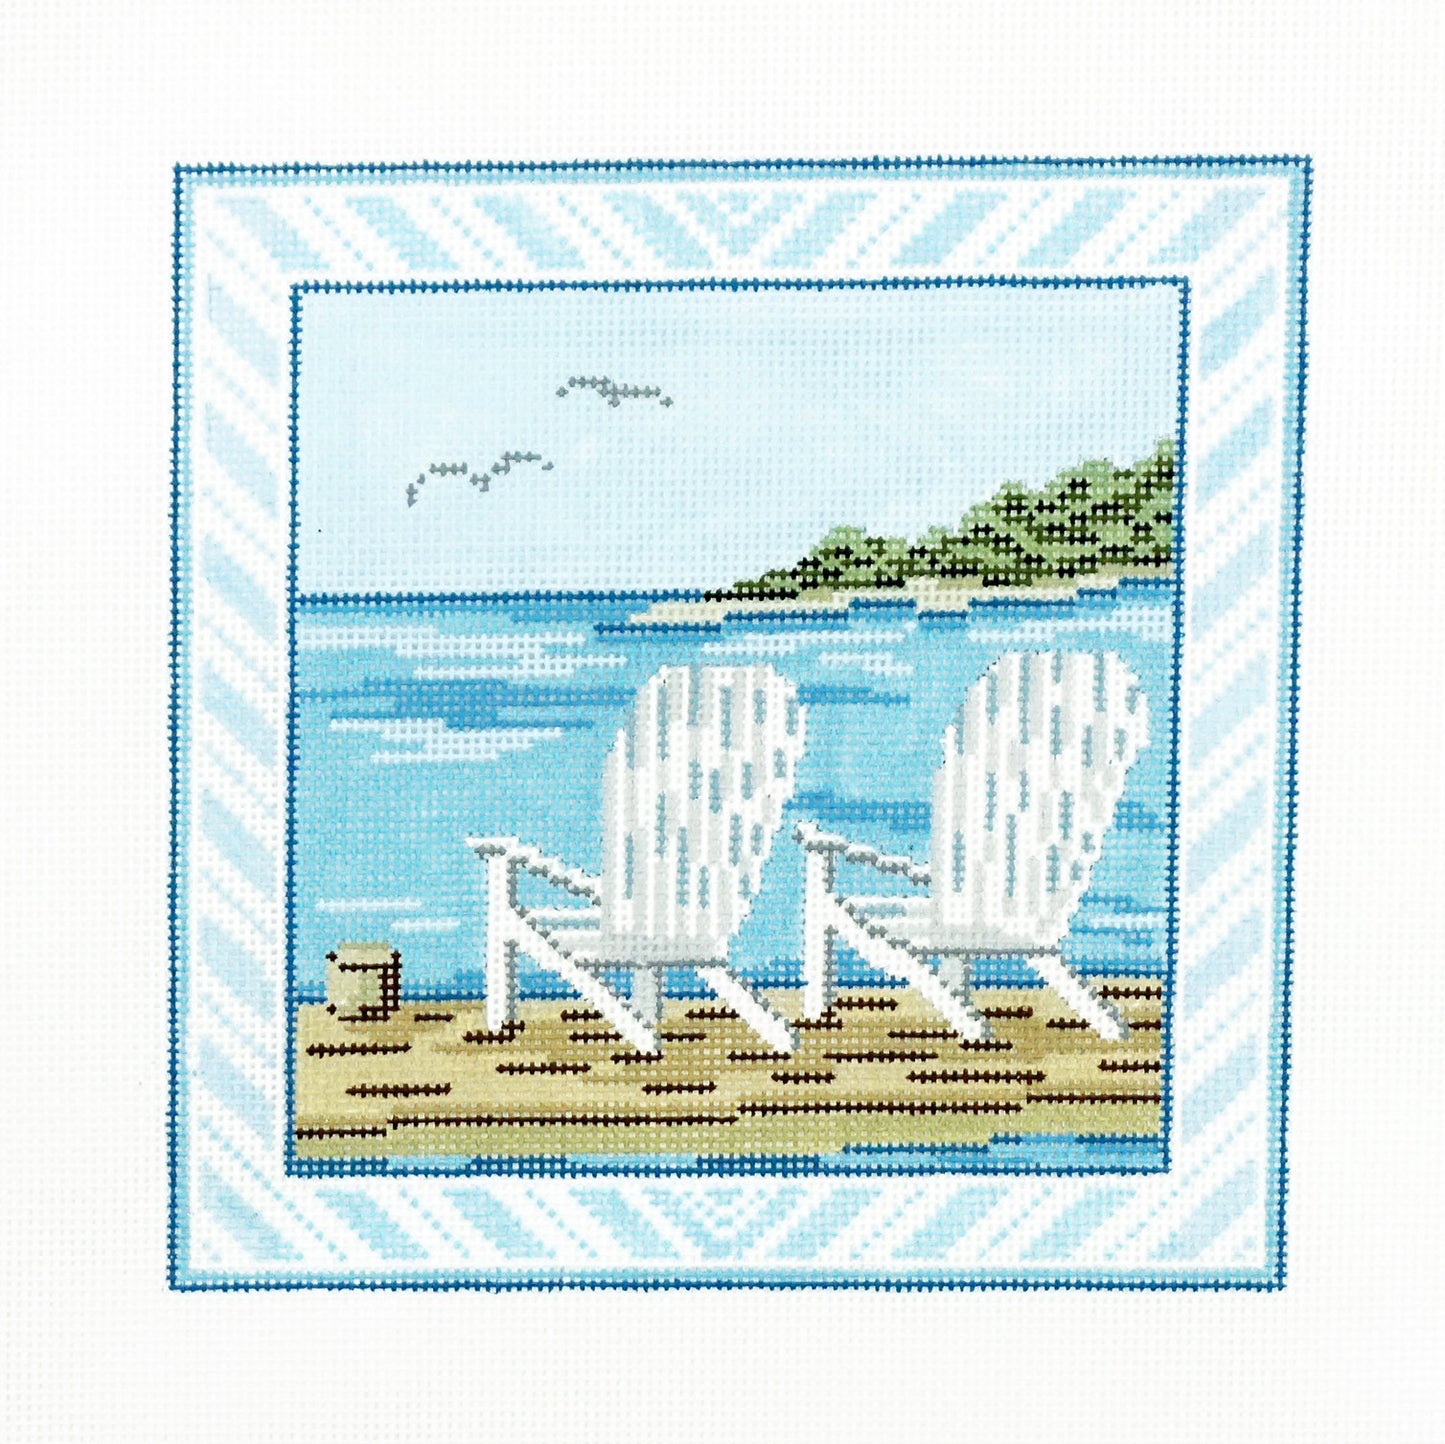 Adirondack Chairs by the Water 8" Square handpainted 13 mesh Needlepoint Canvas by Needle Crossings